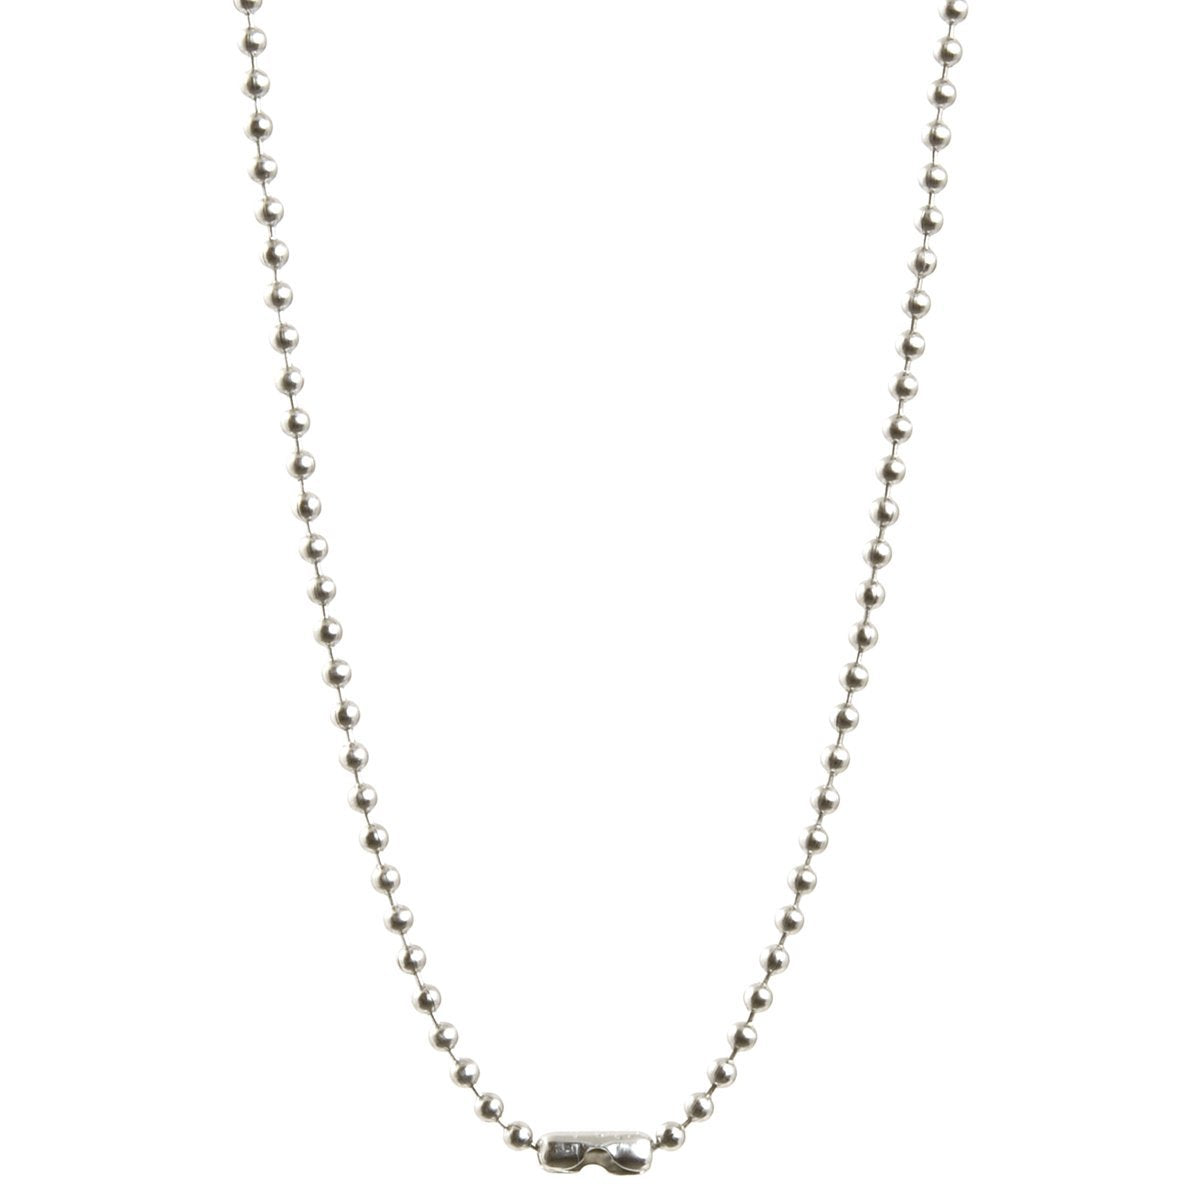 Max Ball Chain (Small, 1.5mm) 16 Inches